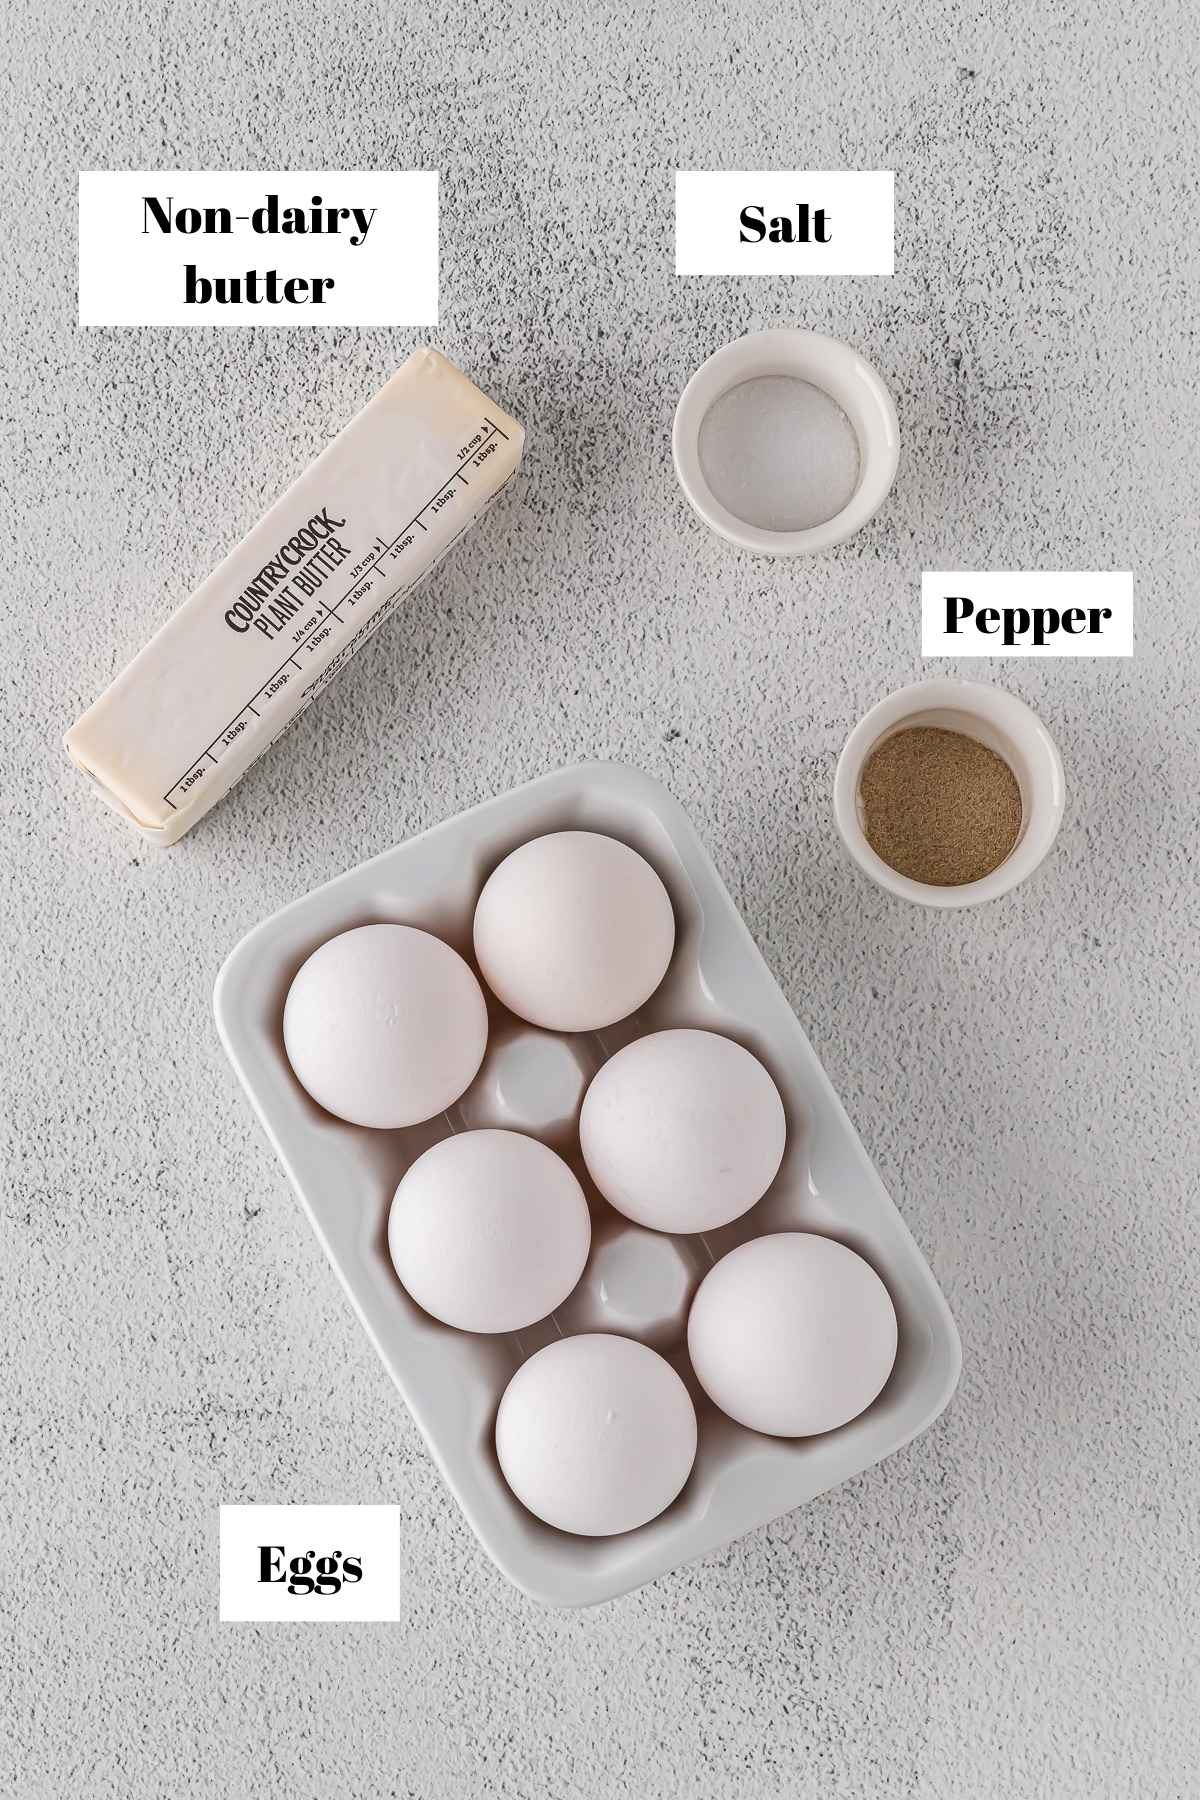 Ingredients to make scrambled eggs without milk. Text on image for labeling ingredients.